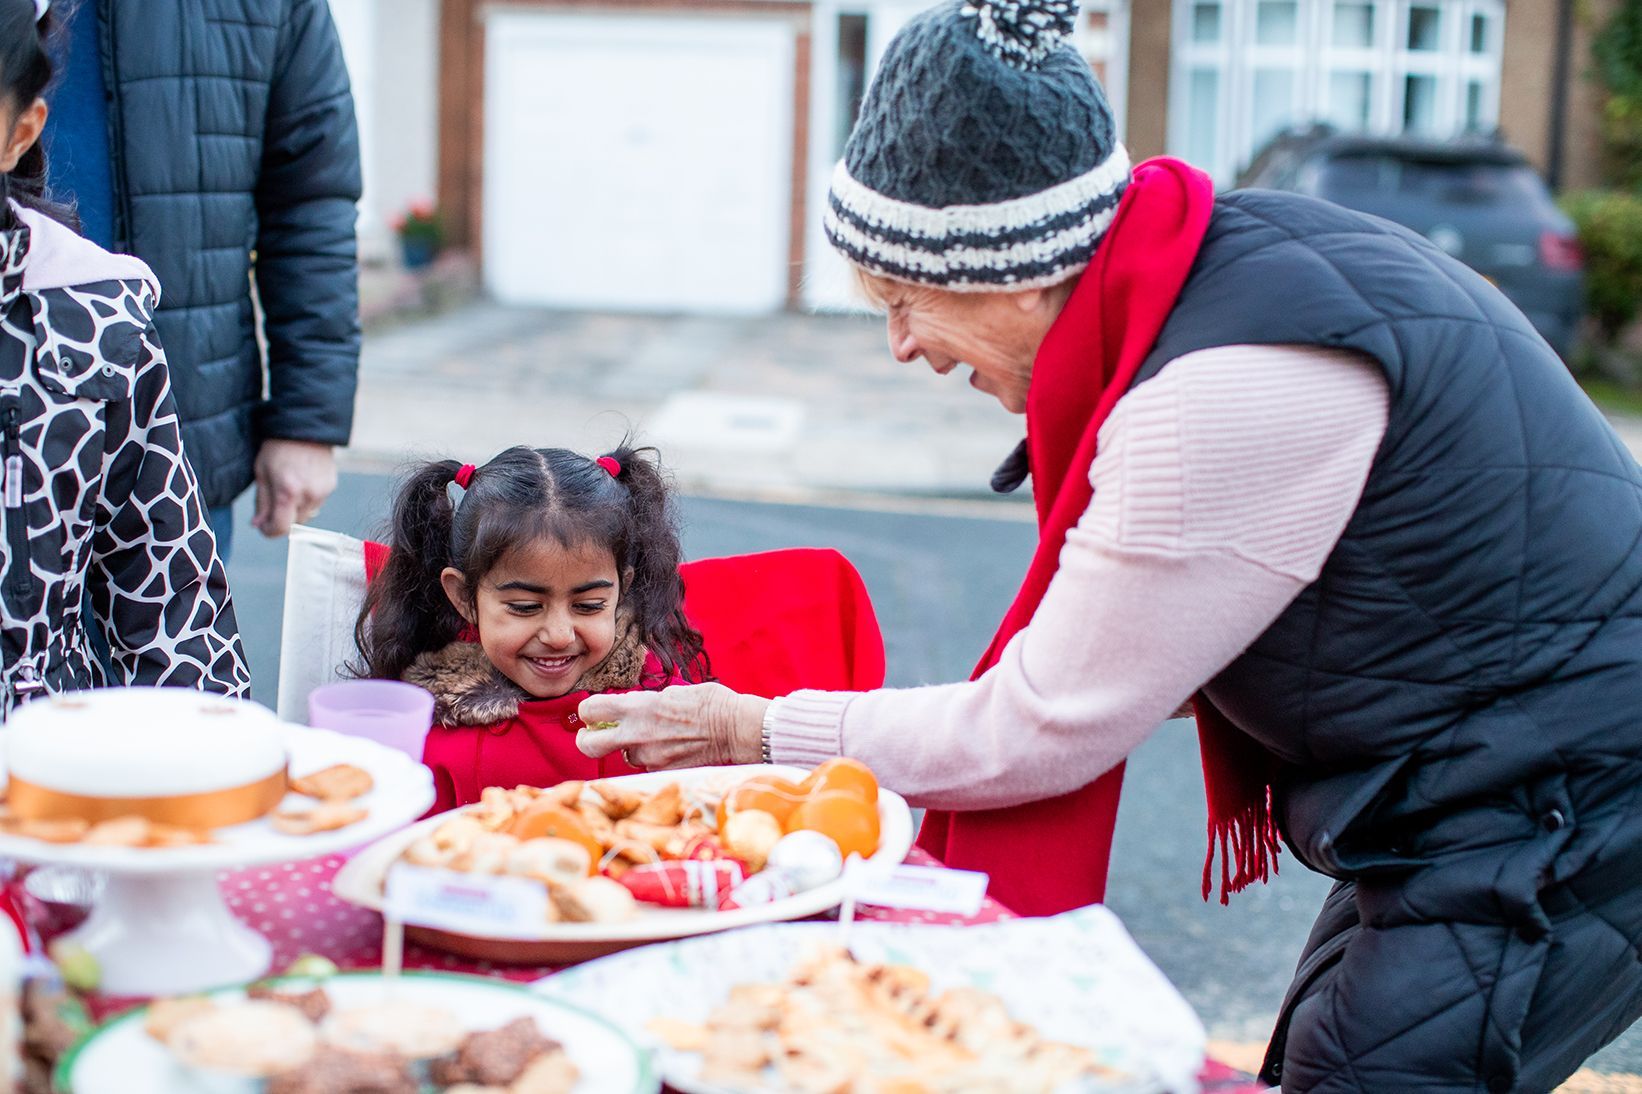 An older woman gives a young girl a mince pie - they're both smiling and wrapped up warm. You can see a table full of delicious festive food.